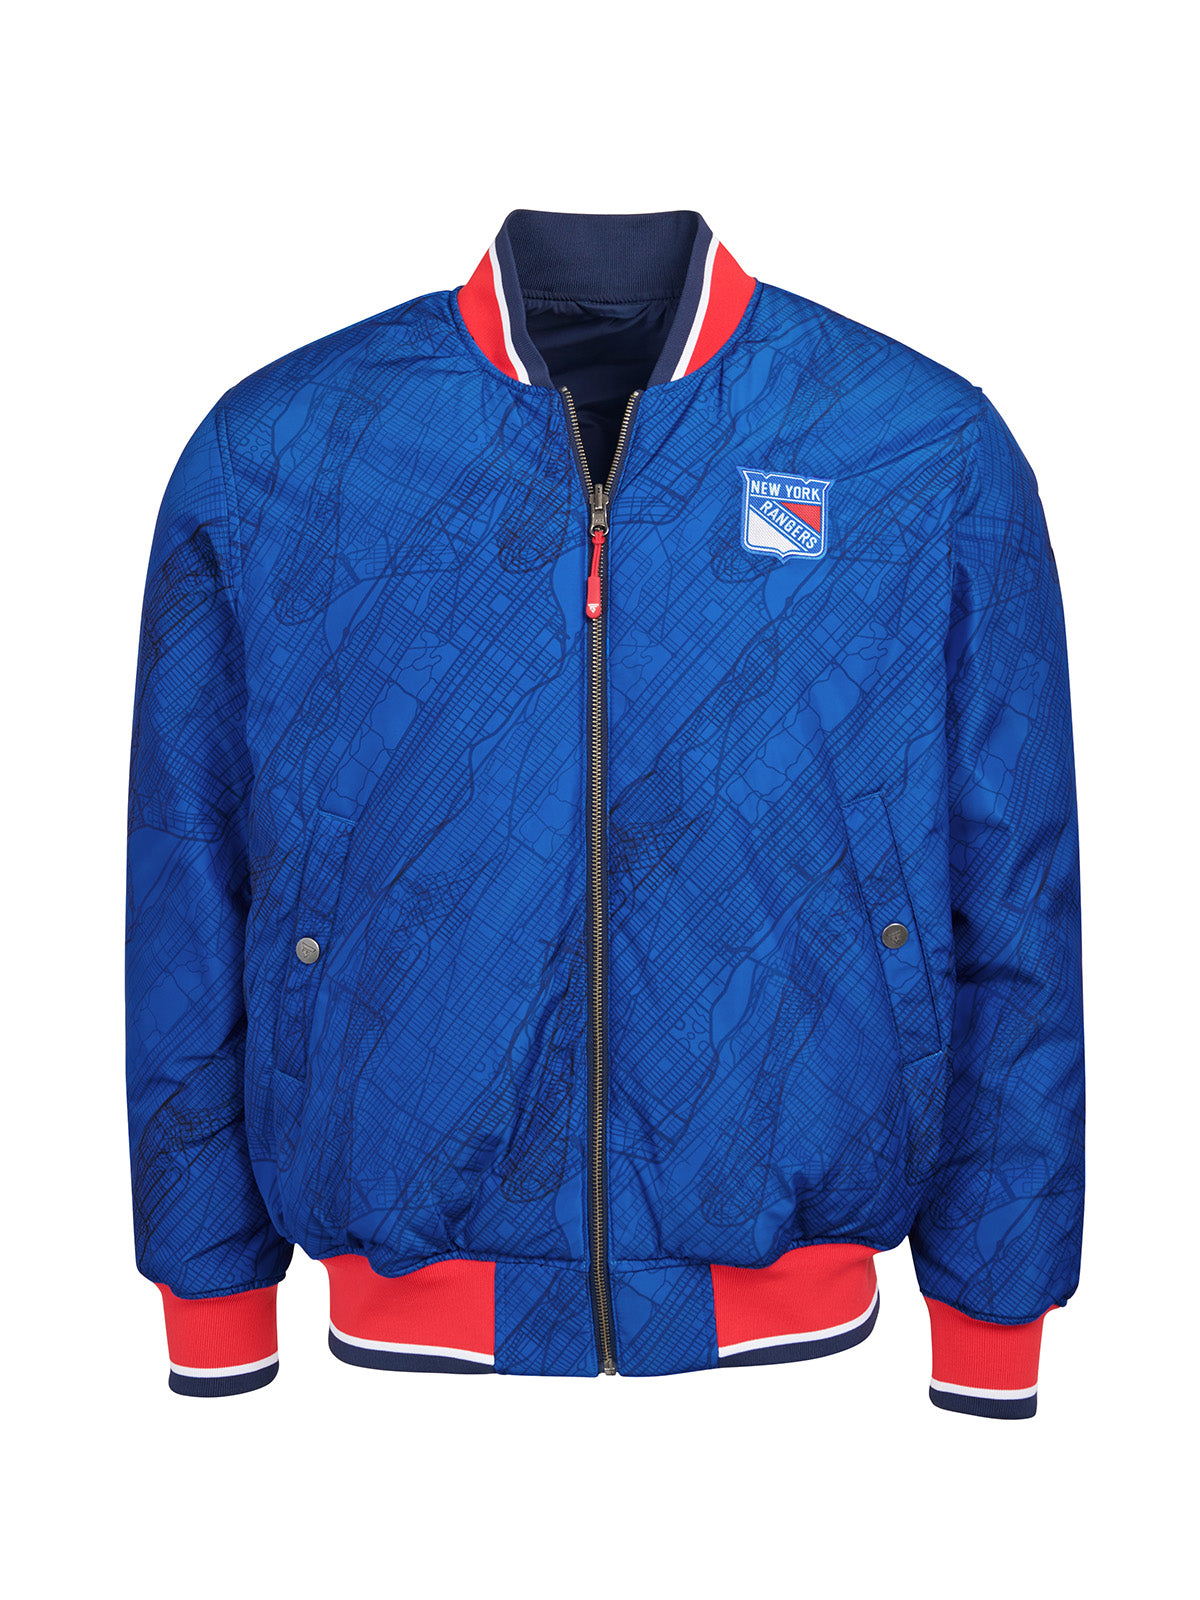 New York Rangers Bomber - Reversible bomber jacket featuring the iconic New York Rangers logo with ribbed cuffs, collar and hem in the team colors